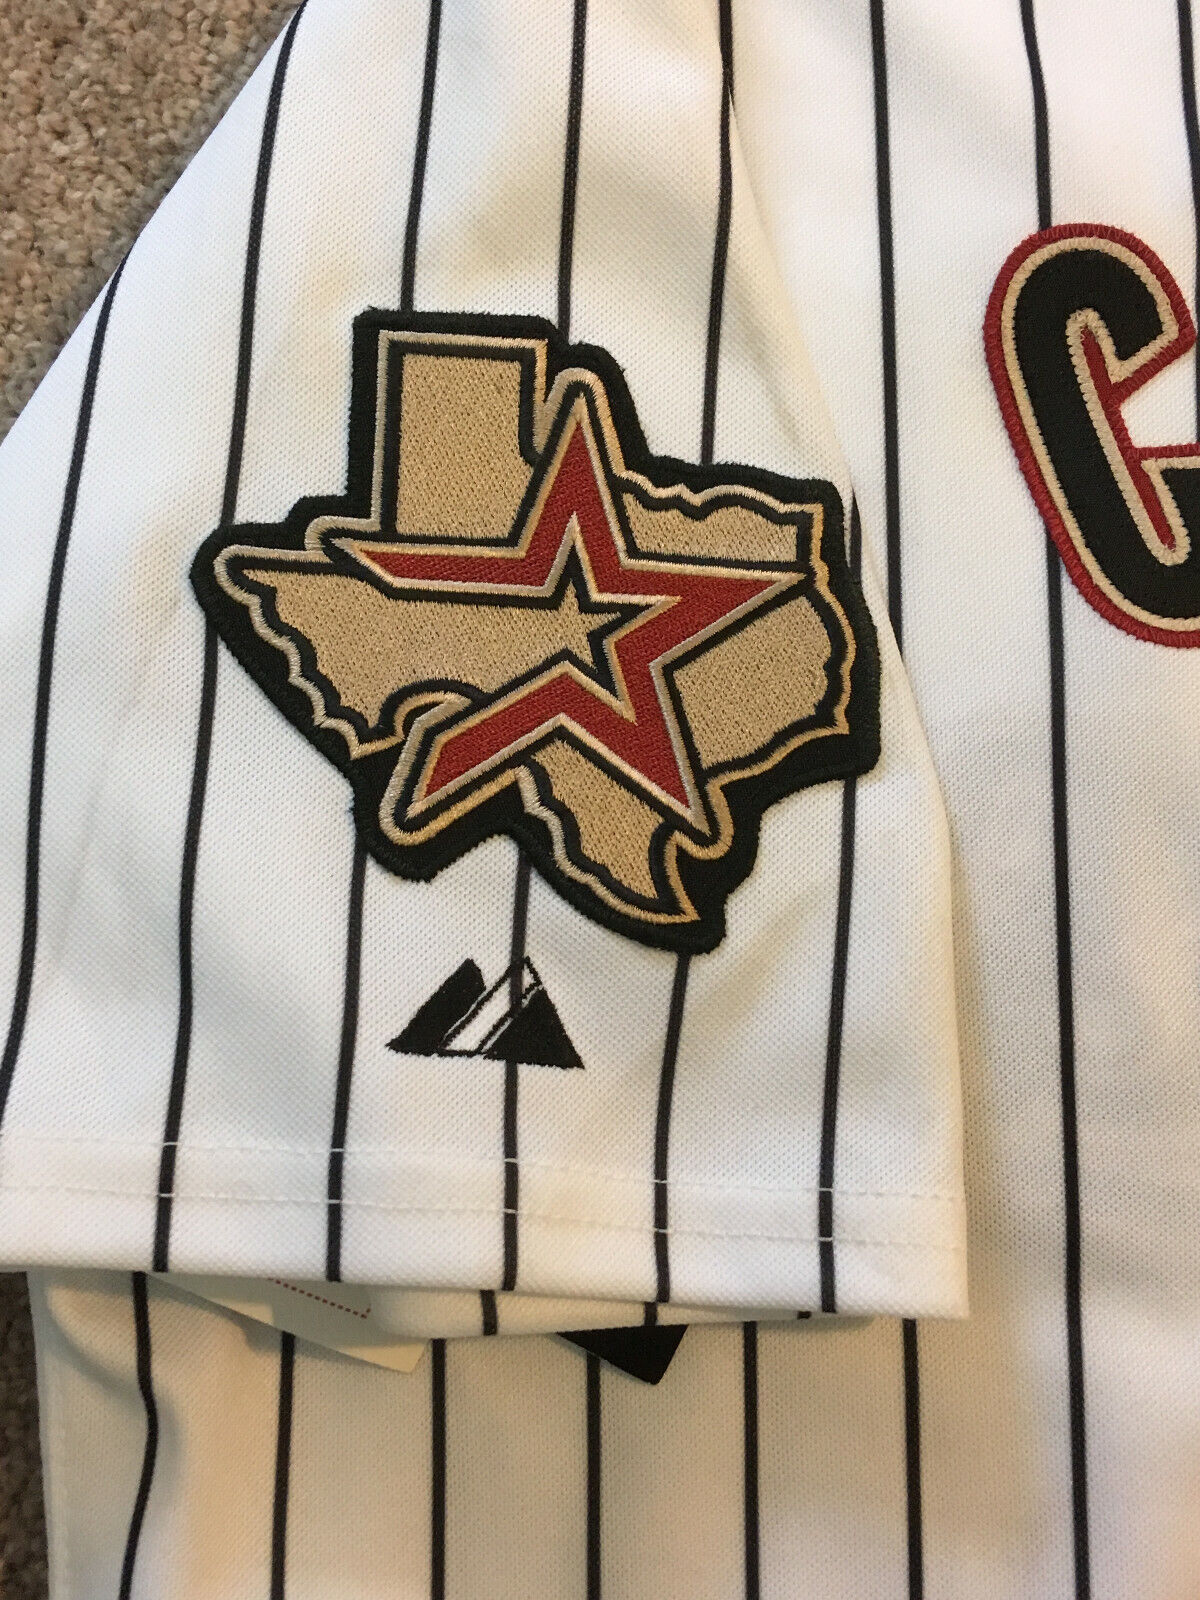 Roger Clemens Autographed Houston Astros 05 WS Jersey Inscribed Cy 7,  Rocket, 354 W/4672 K